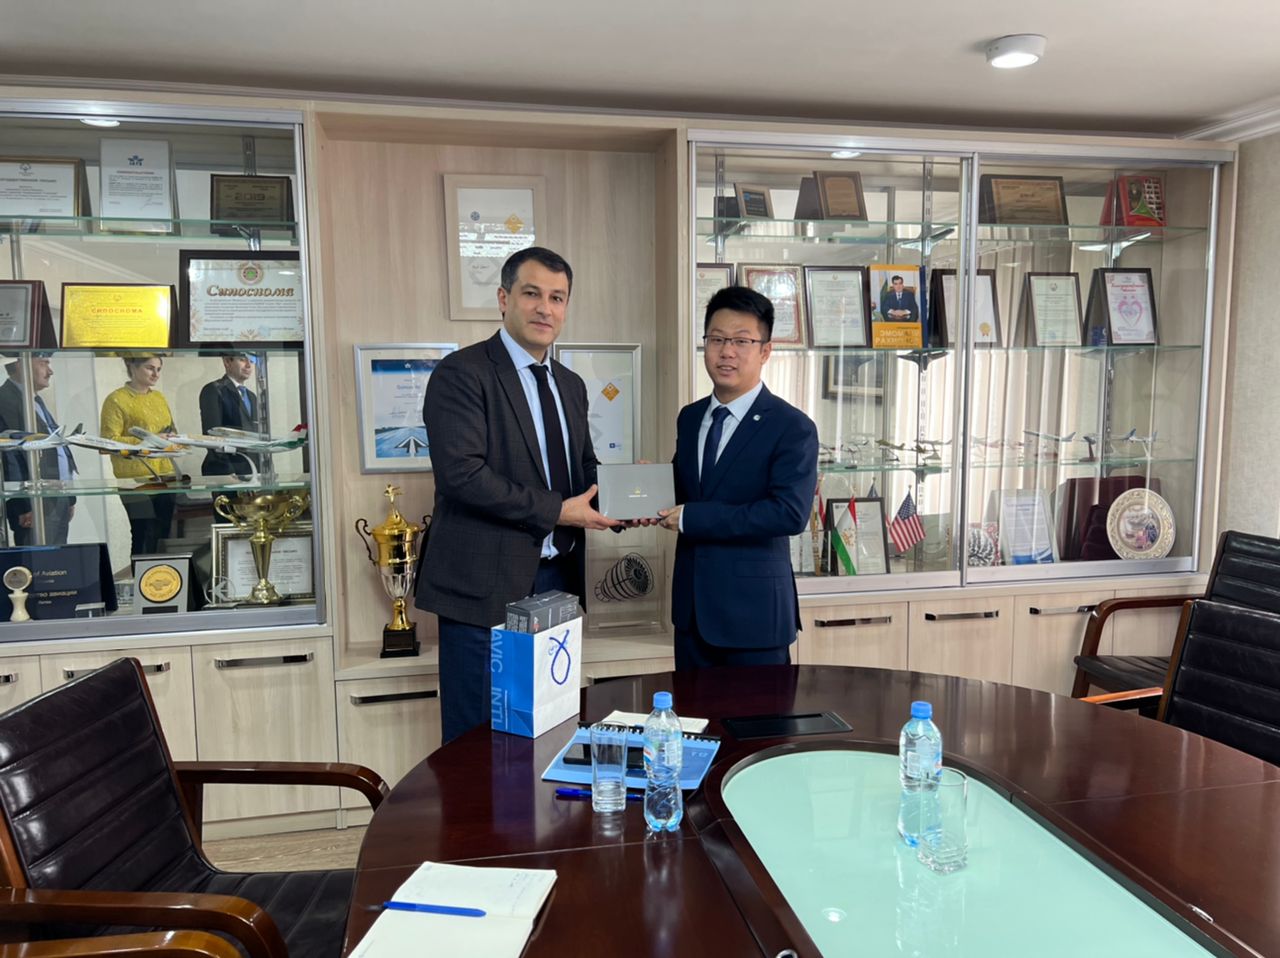 SOMON AIR MANAGEMENT HELD A MEETING WITH REPRESENTATIVES OF AVIC INTL COMPANY